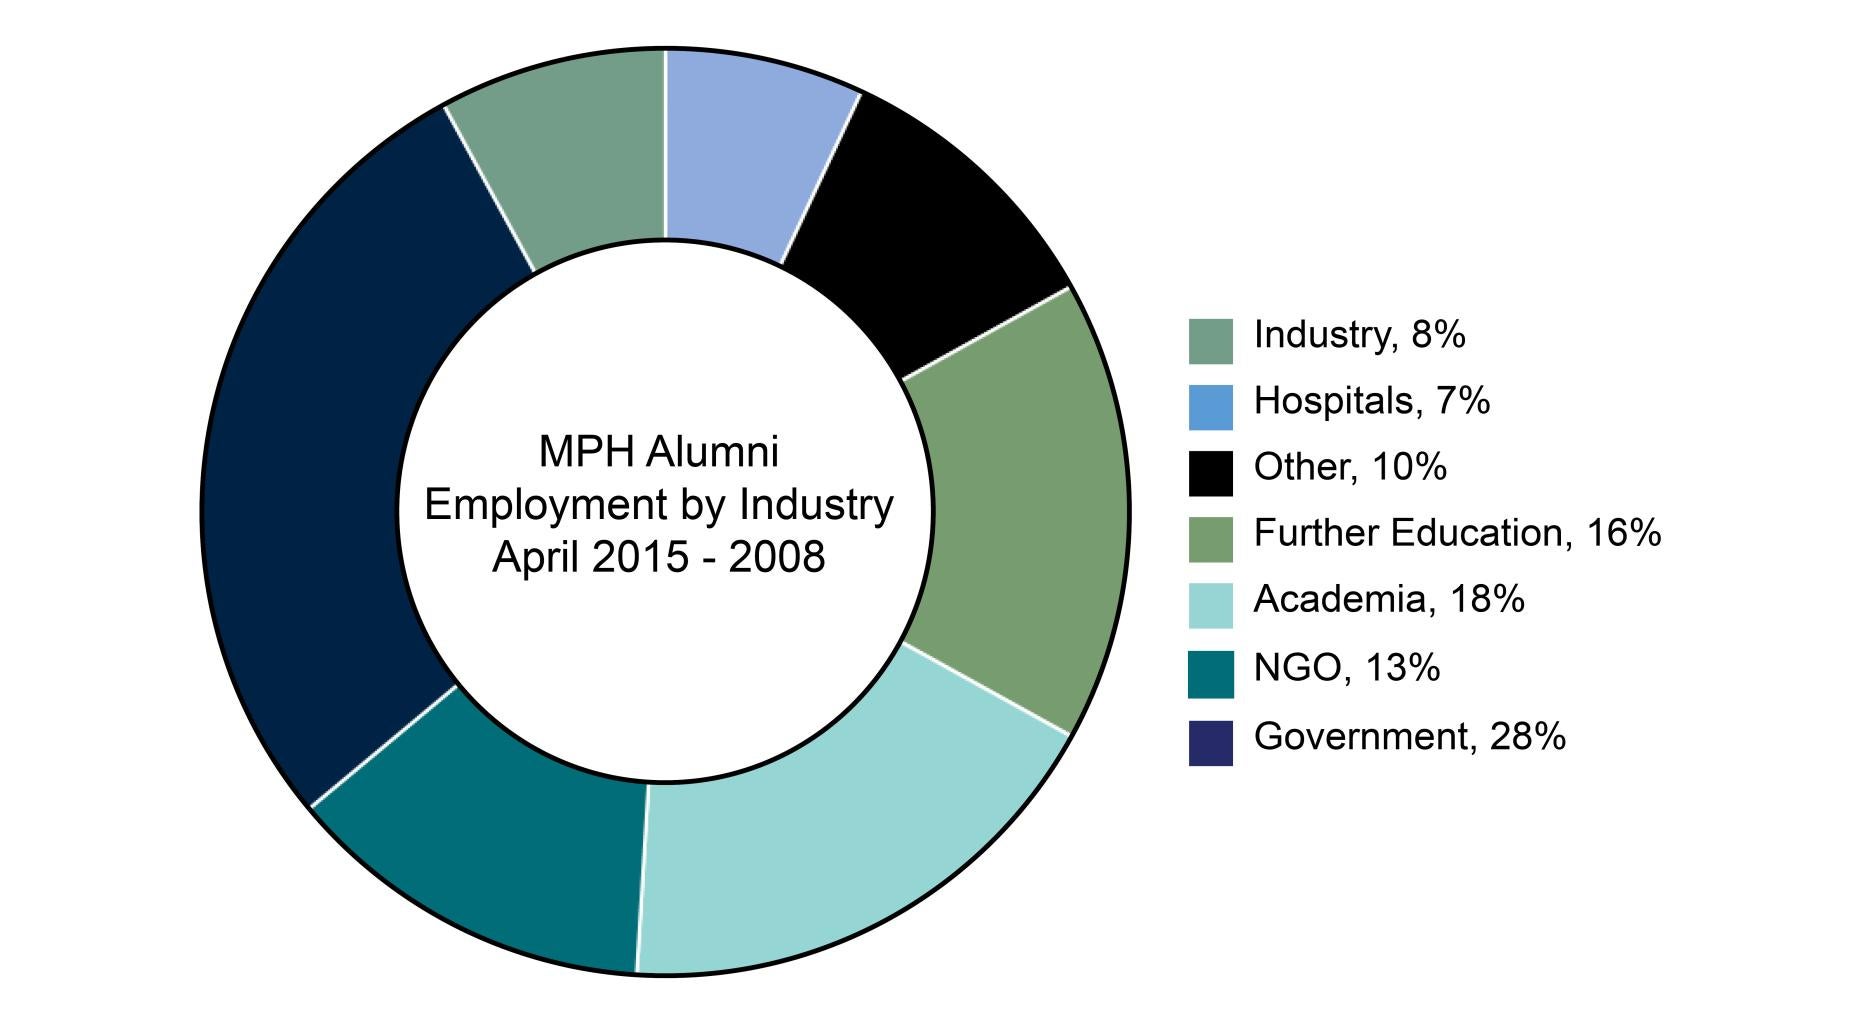 MPH Alumni Employment by Industry graph